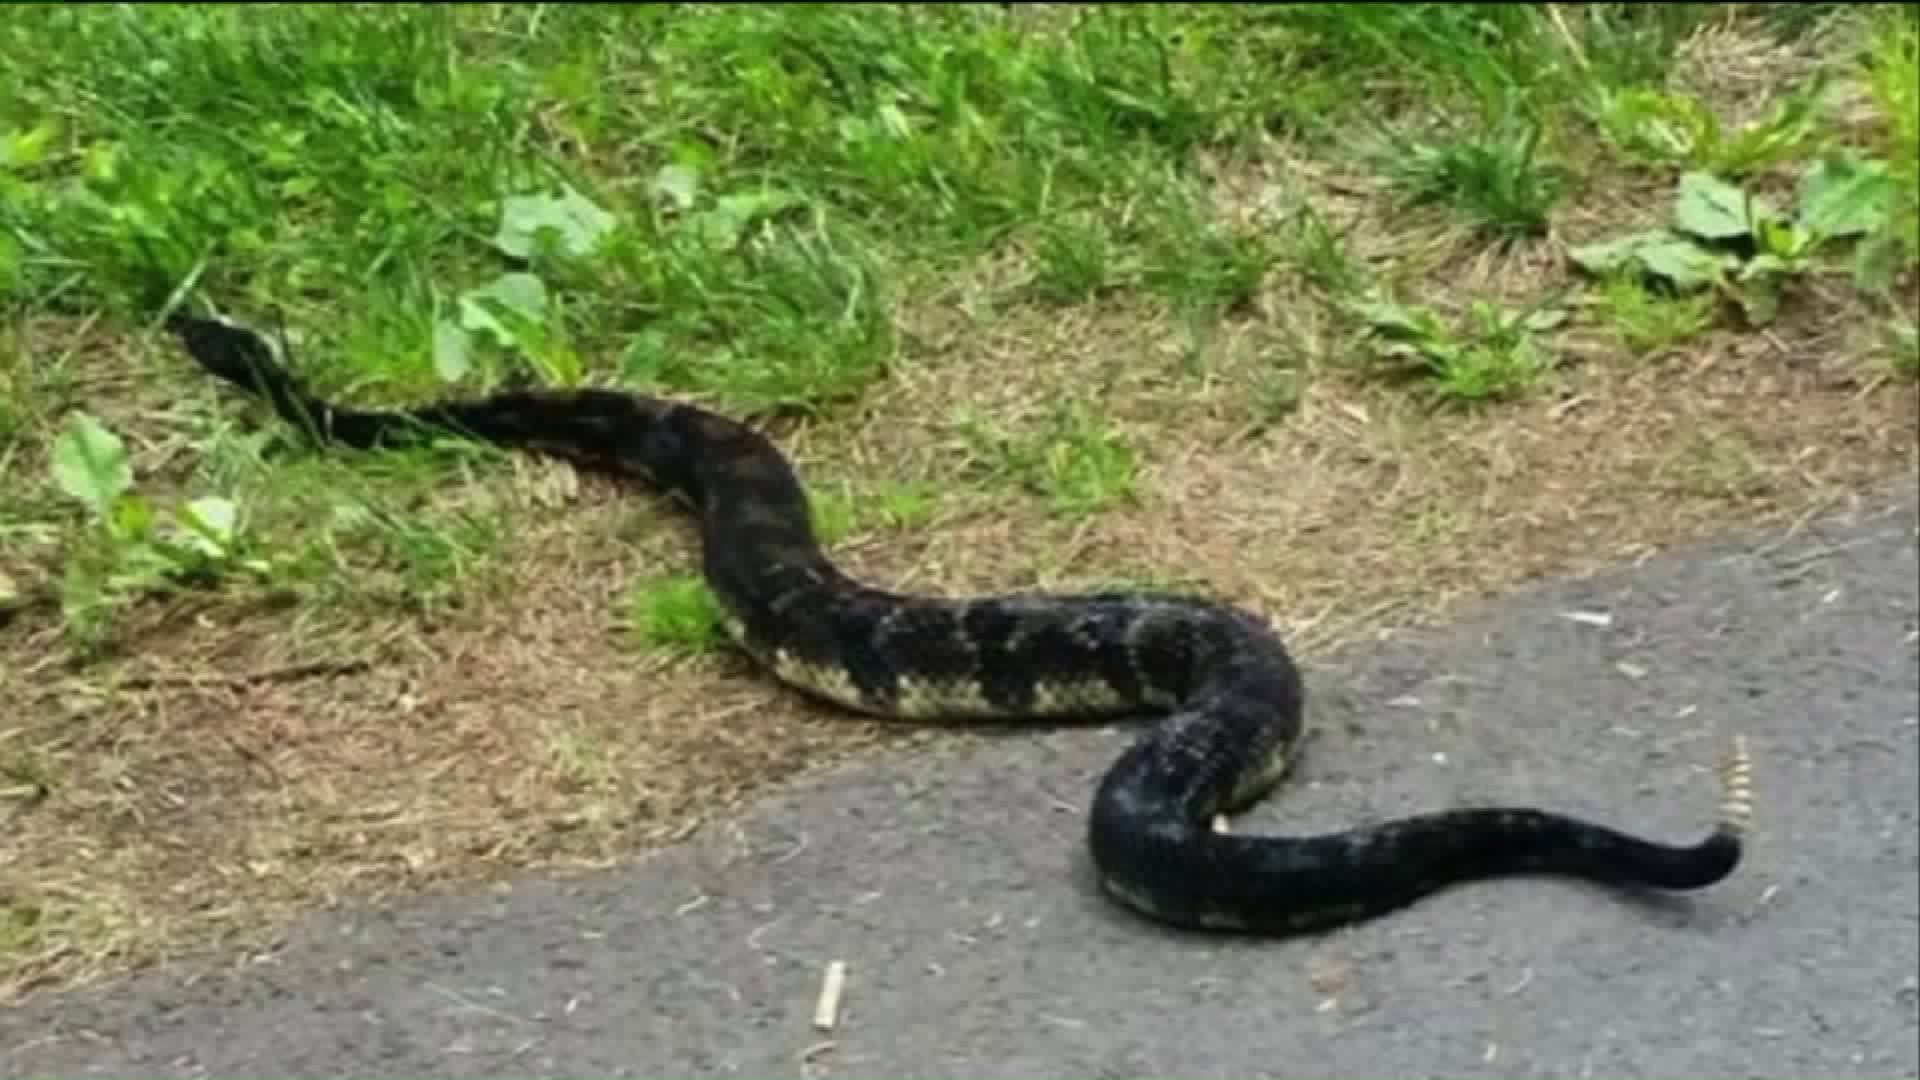 Construction Project Causing Snake Problem?